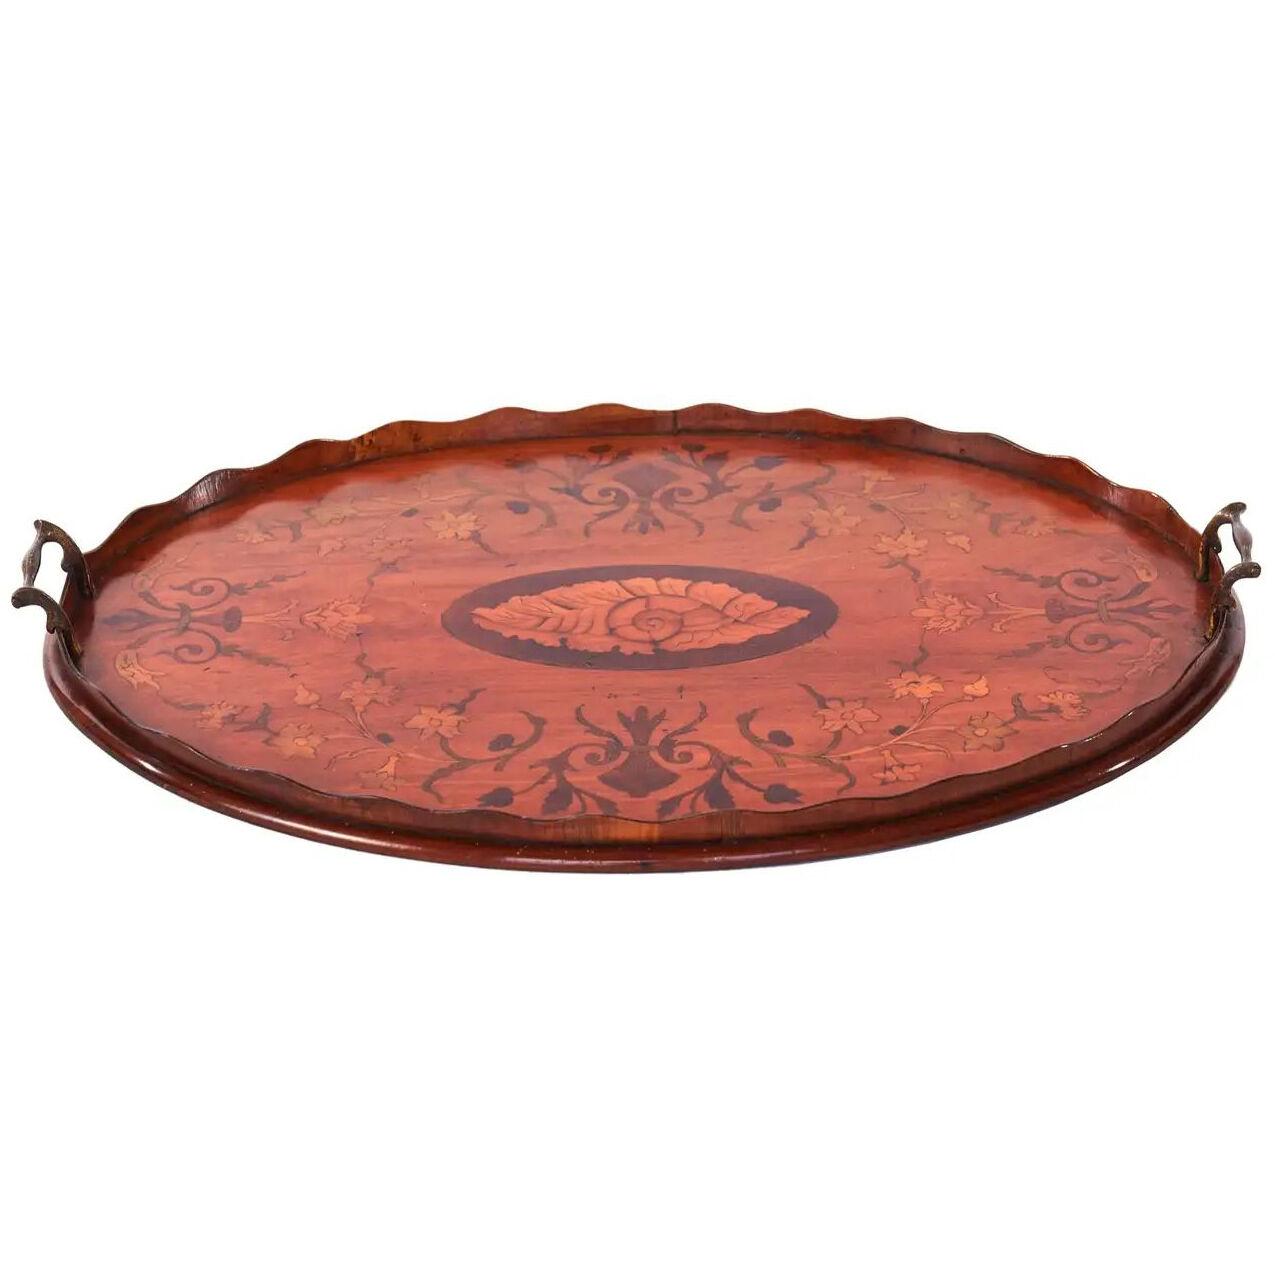 Antique Sheraton Revival Oval Satinwood Inlaid Serving Tray